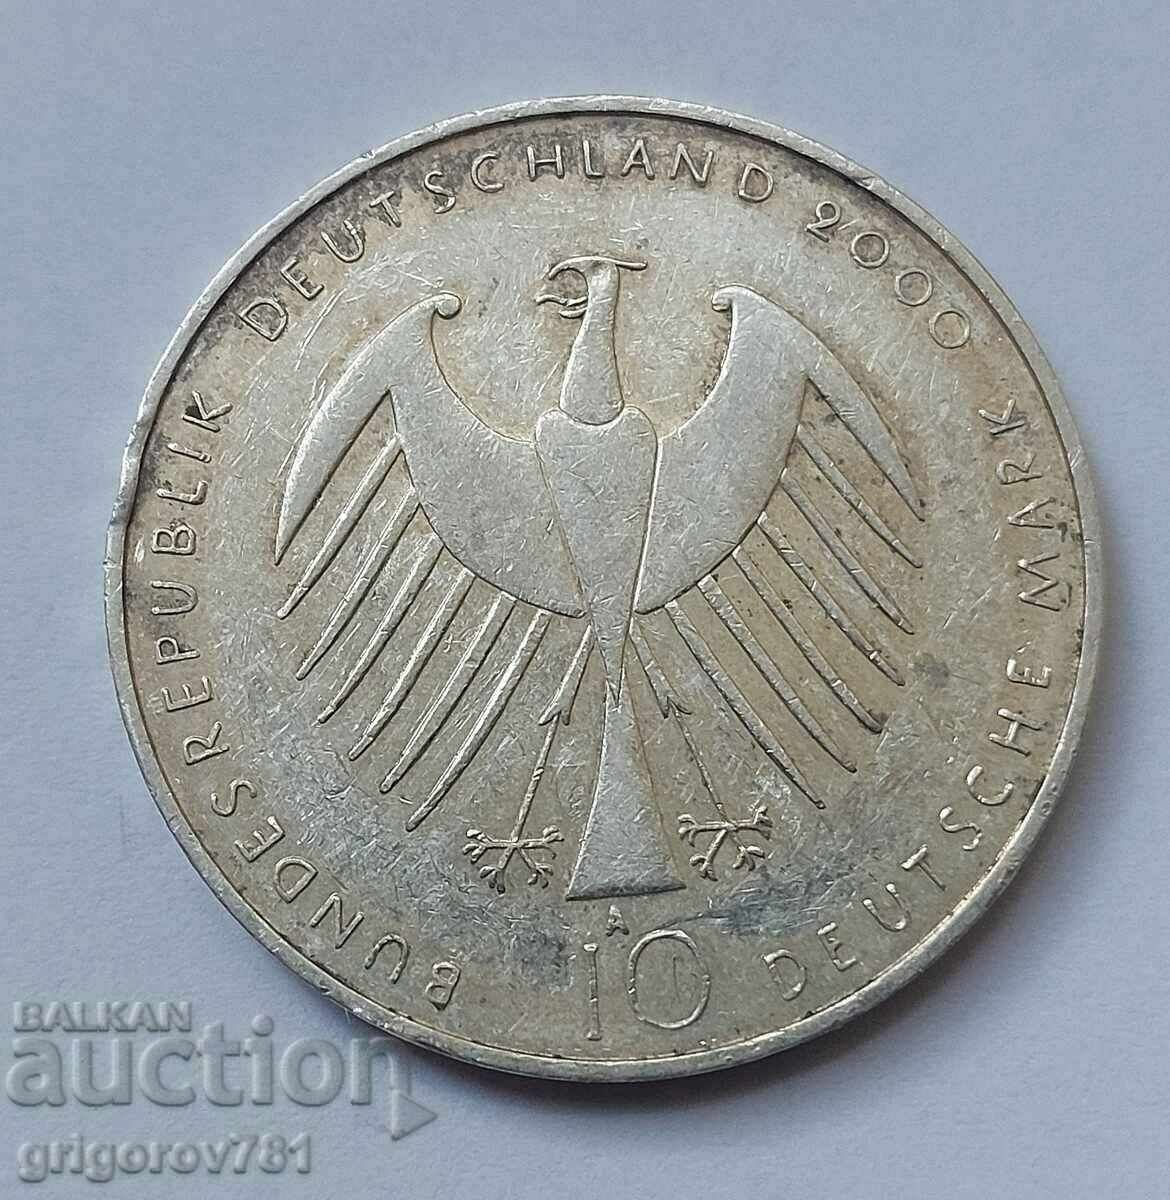 10 silver marks Germany 2000 A - silver coin